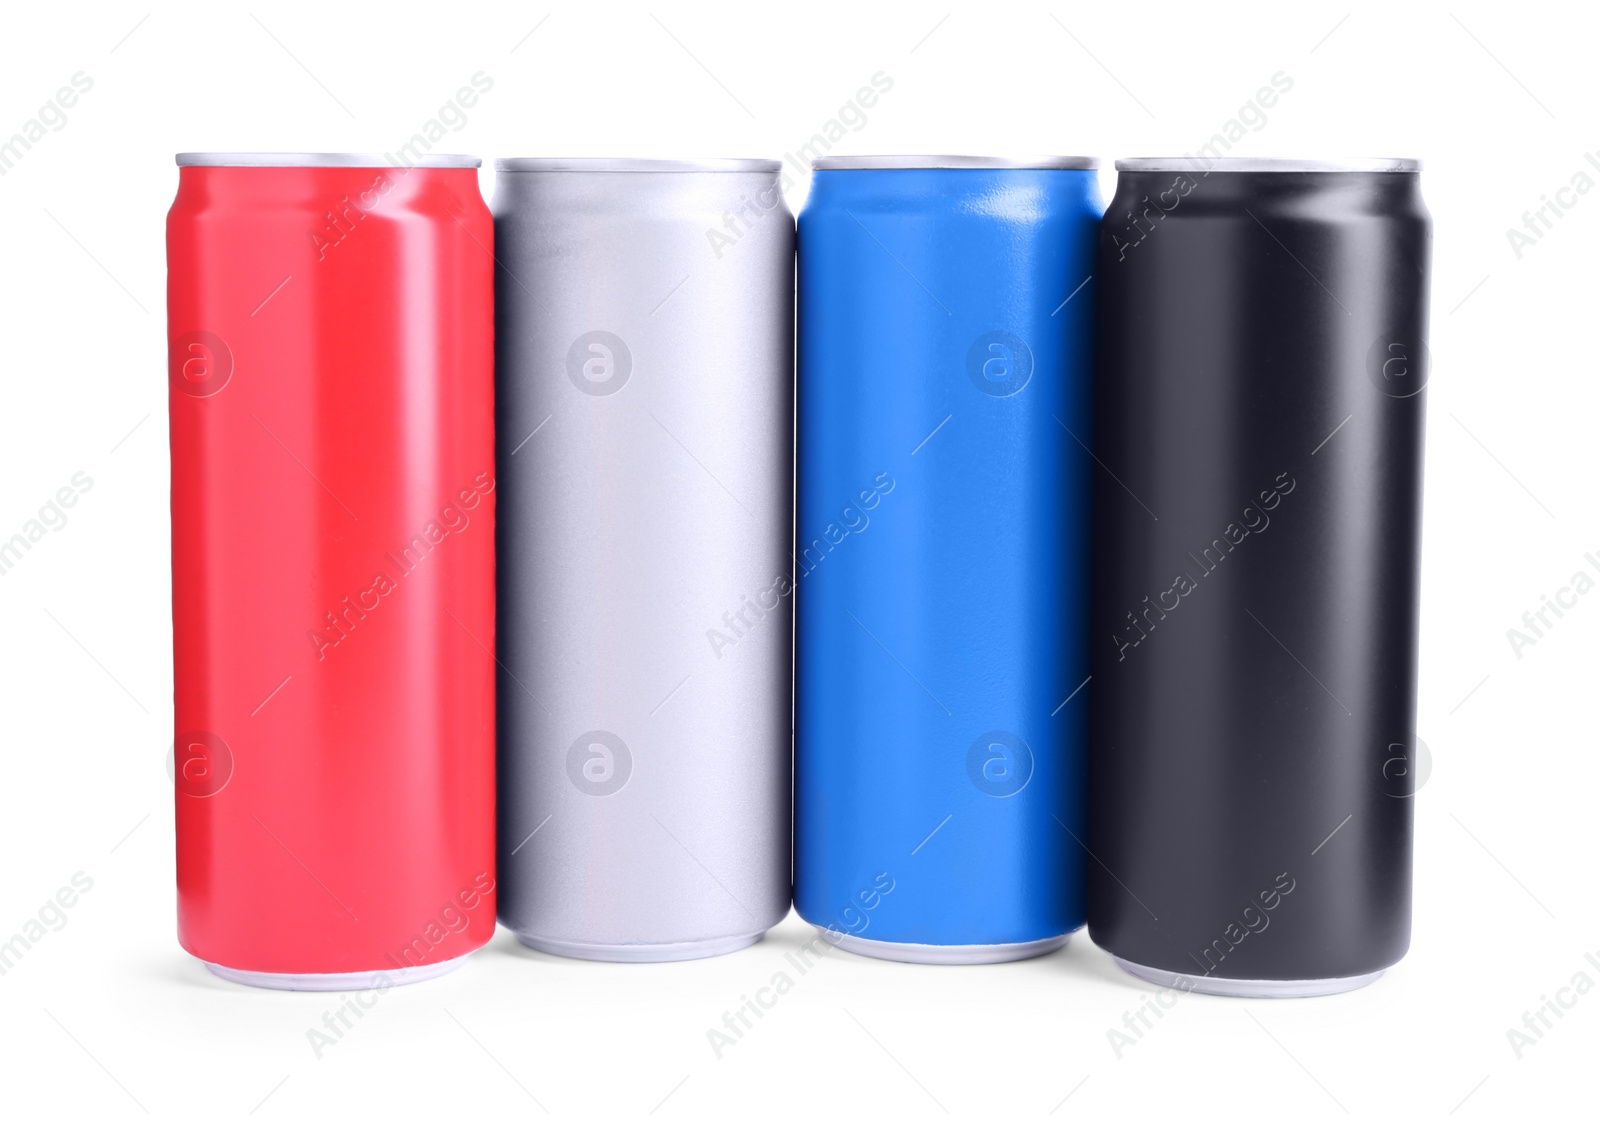 Photo of Energy drinks in colorful cans isolated on white